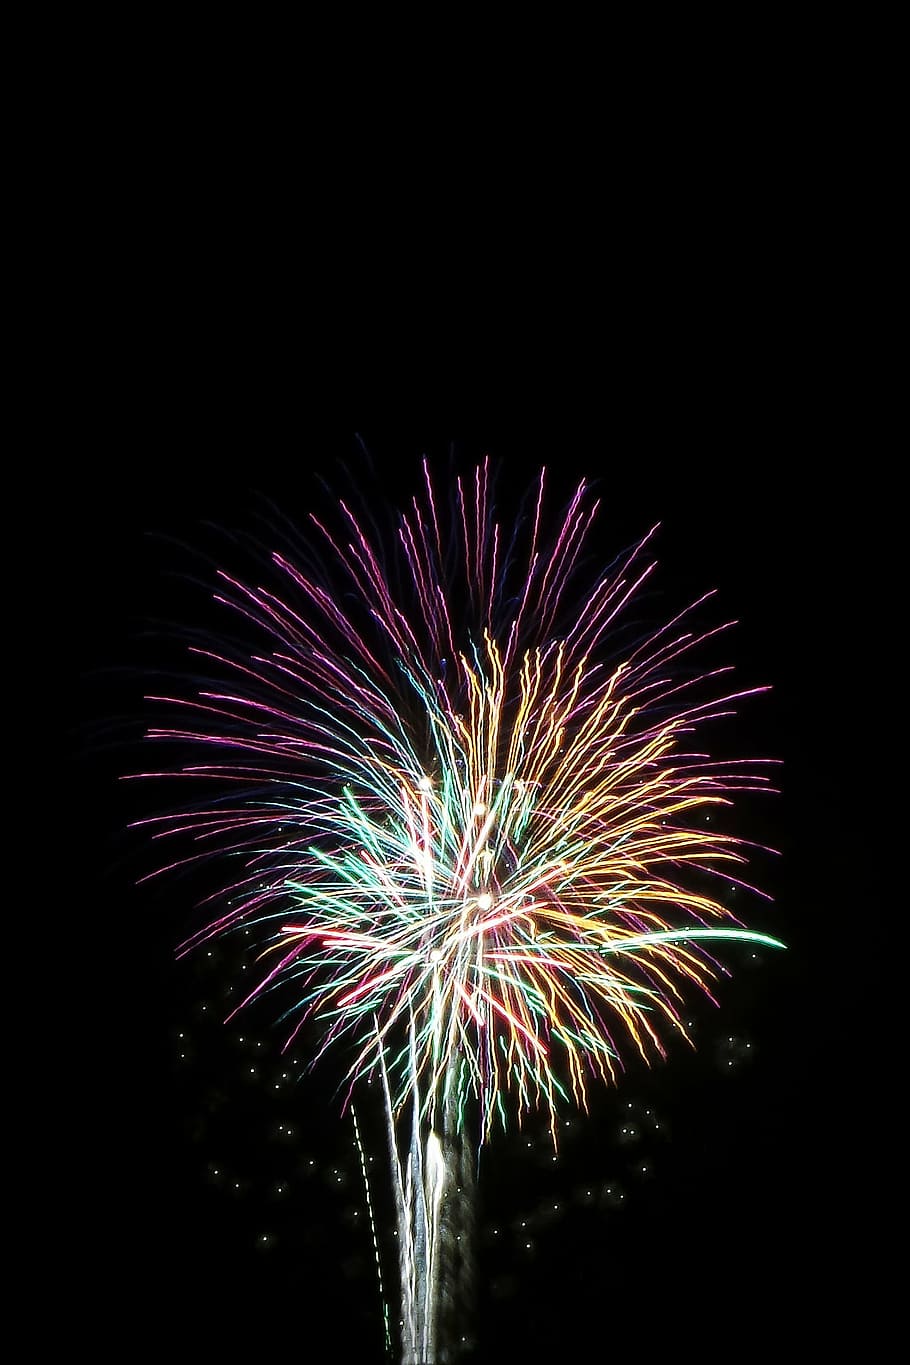 fireworks during nighttime, rockets, fireworks, party, night, celebration, exploding, firework Display, fire - Natural Phenomenon, firework - Man Made Object